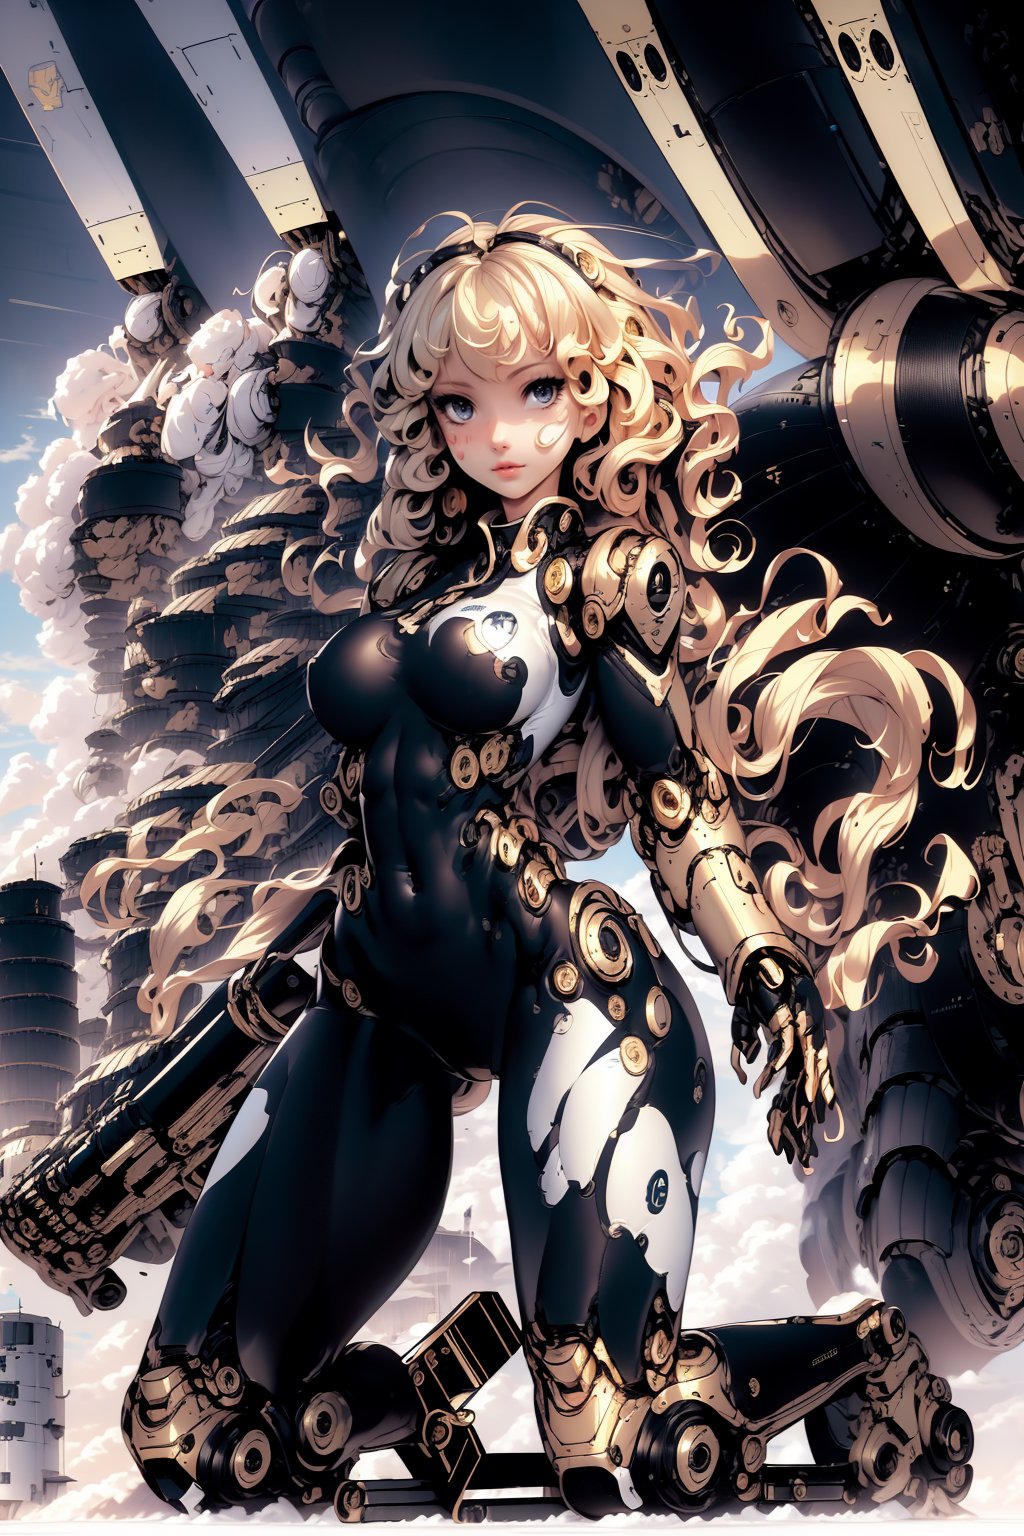 A woman with blond curly hair, black eyes, slender figure, wearing a golden tights and precision mechanical armed equipment, covering part of her body, in a kneeling position, holding a cannon in her hand, looking up, the picture is taken from top to bottom, her face Facing the huge robot, with a military base in the background